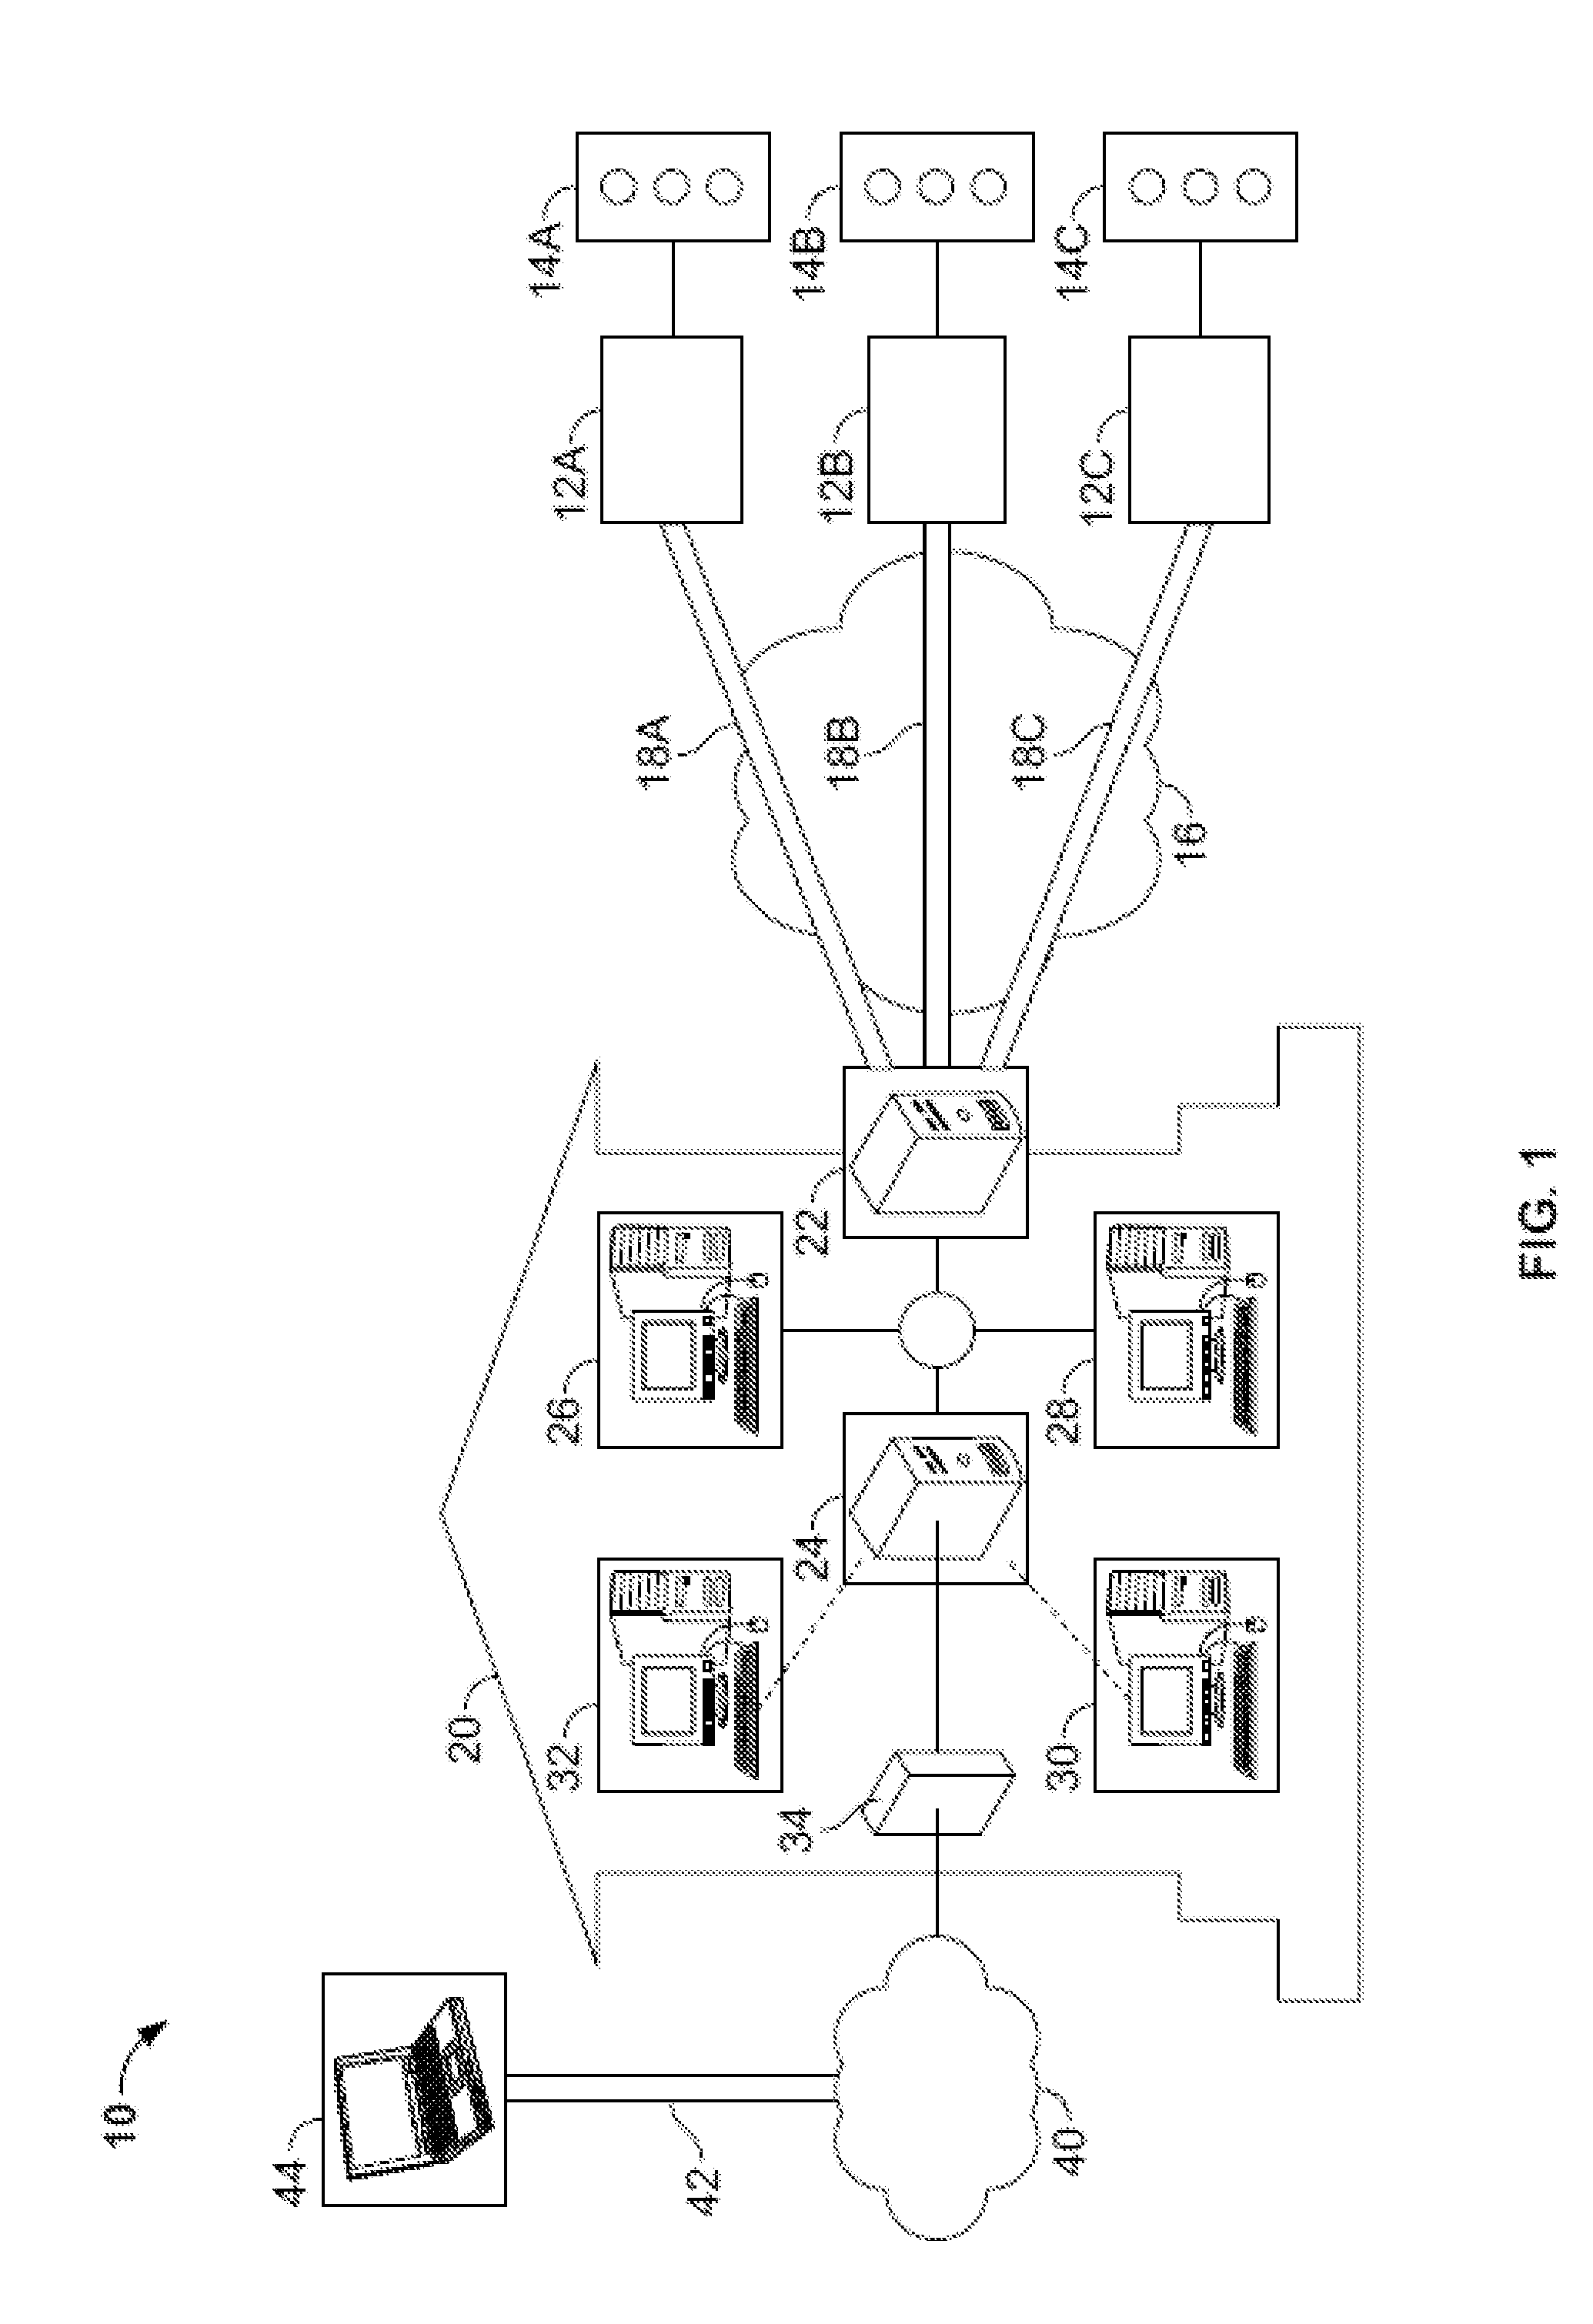 System and Method for Monitoring Attempted Network Intrusions